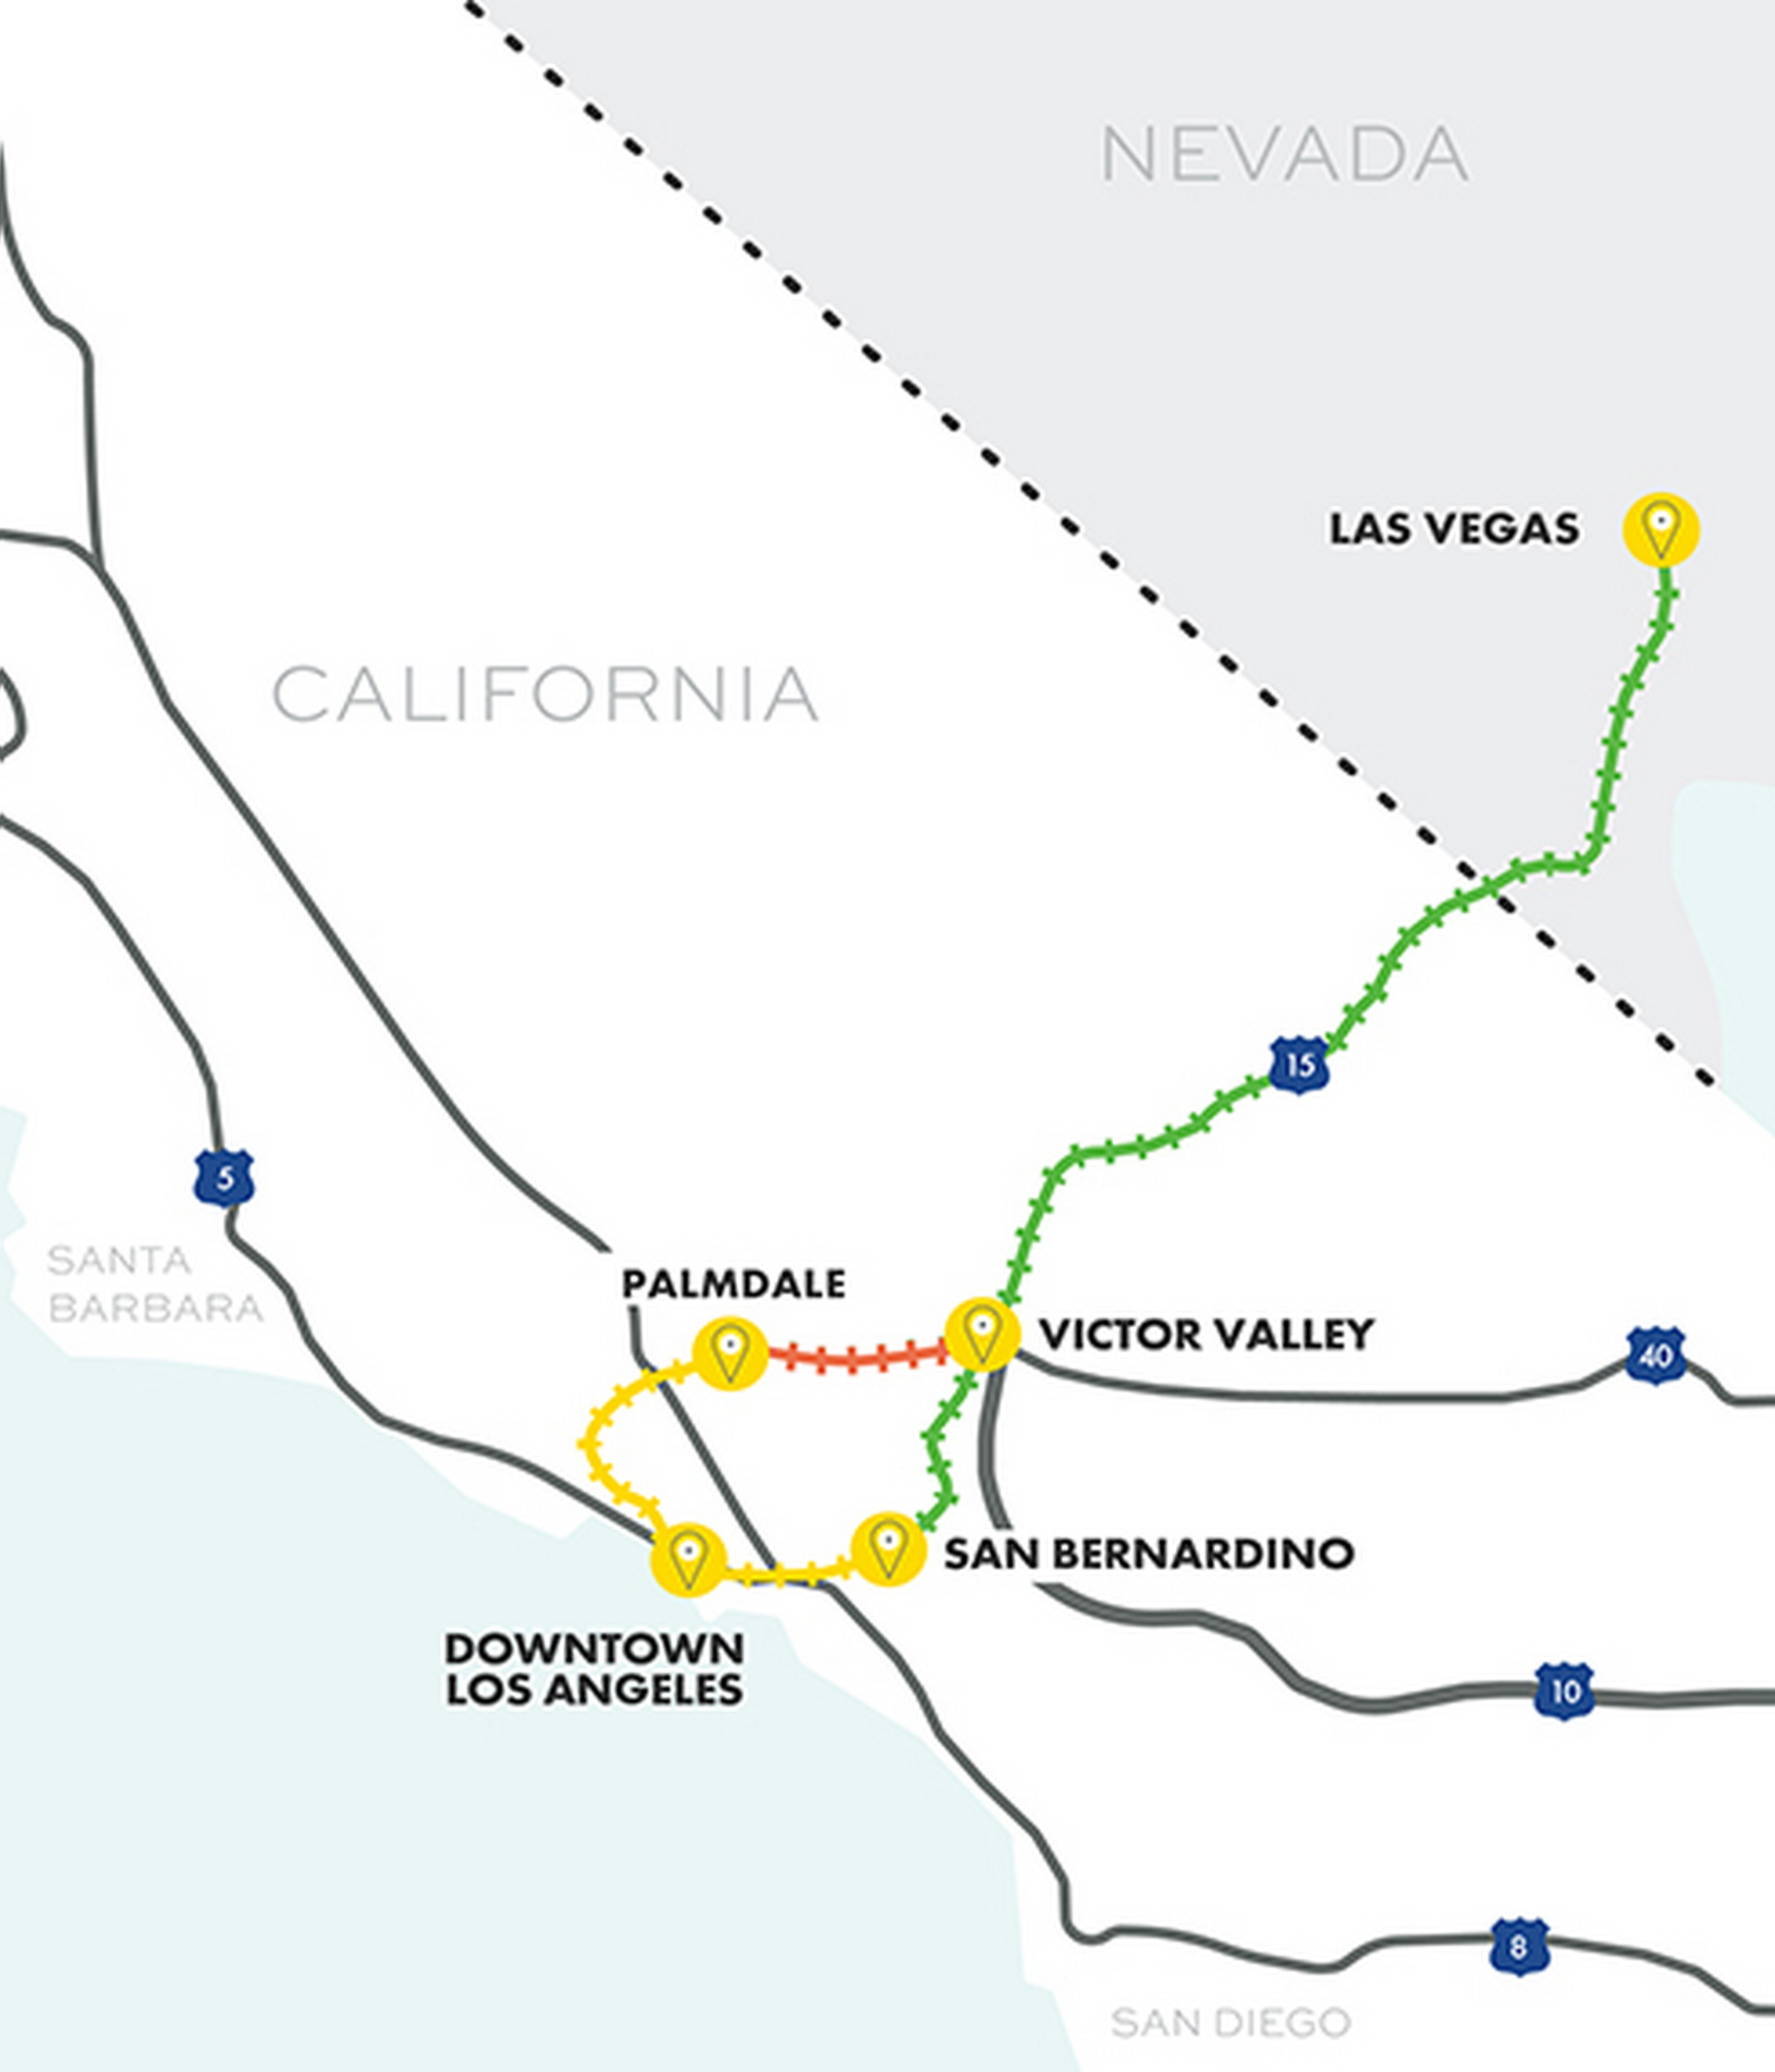 2022 1014 Las Vegas Route Map Updated@4x 100 